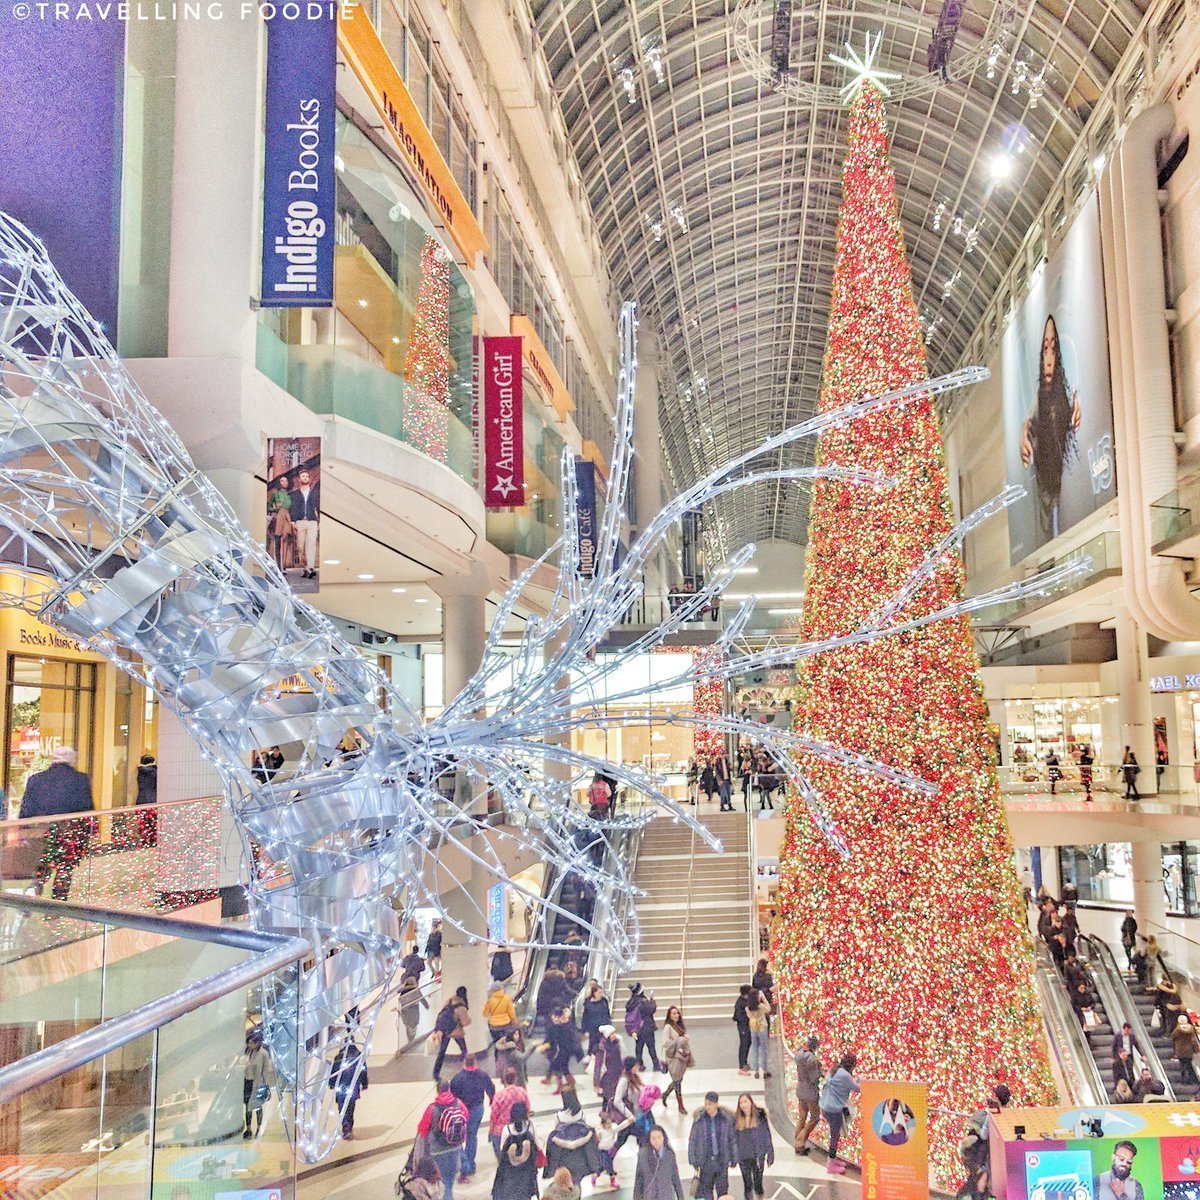 Canada's Largest Christmas Tree at the Eaton Centre